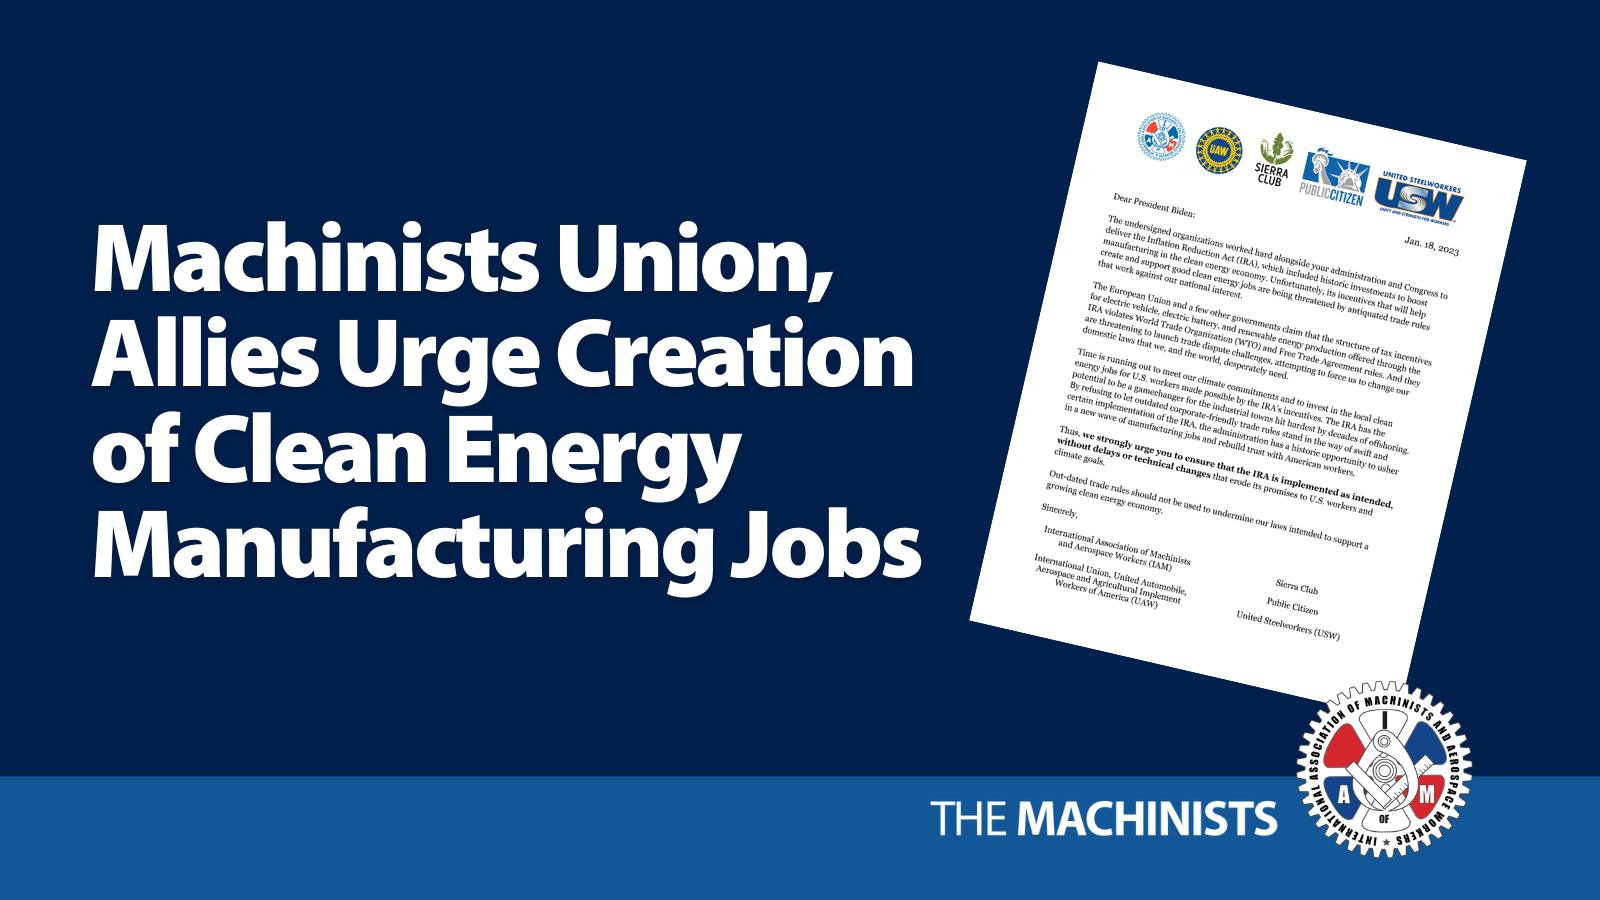 Machinists Union, Allies Urge Creation of Clean Energy Manufacturing Jobs